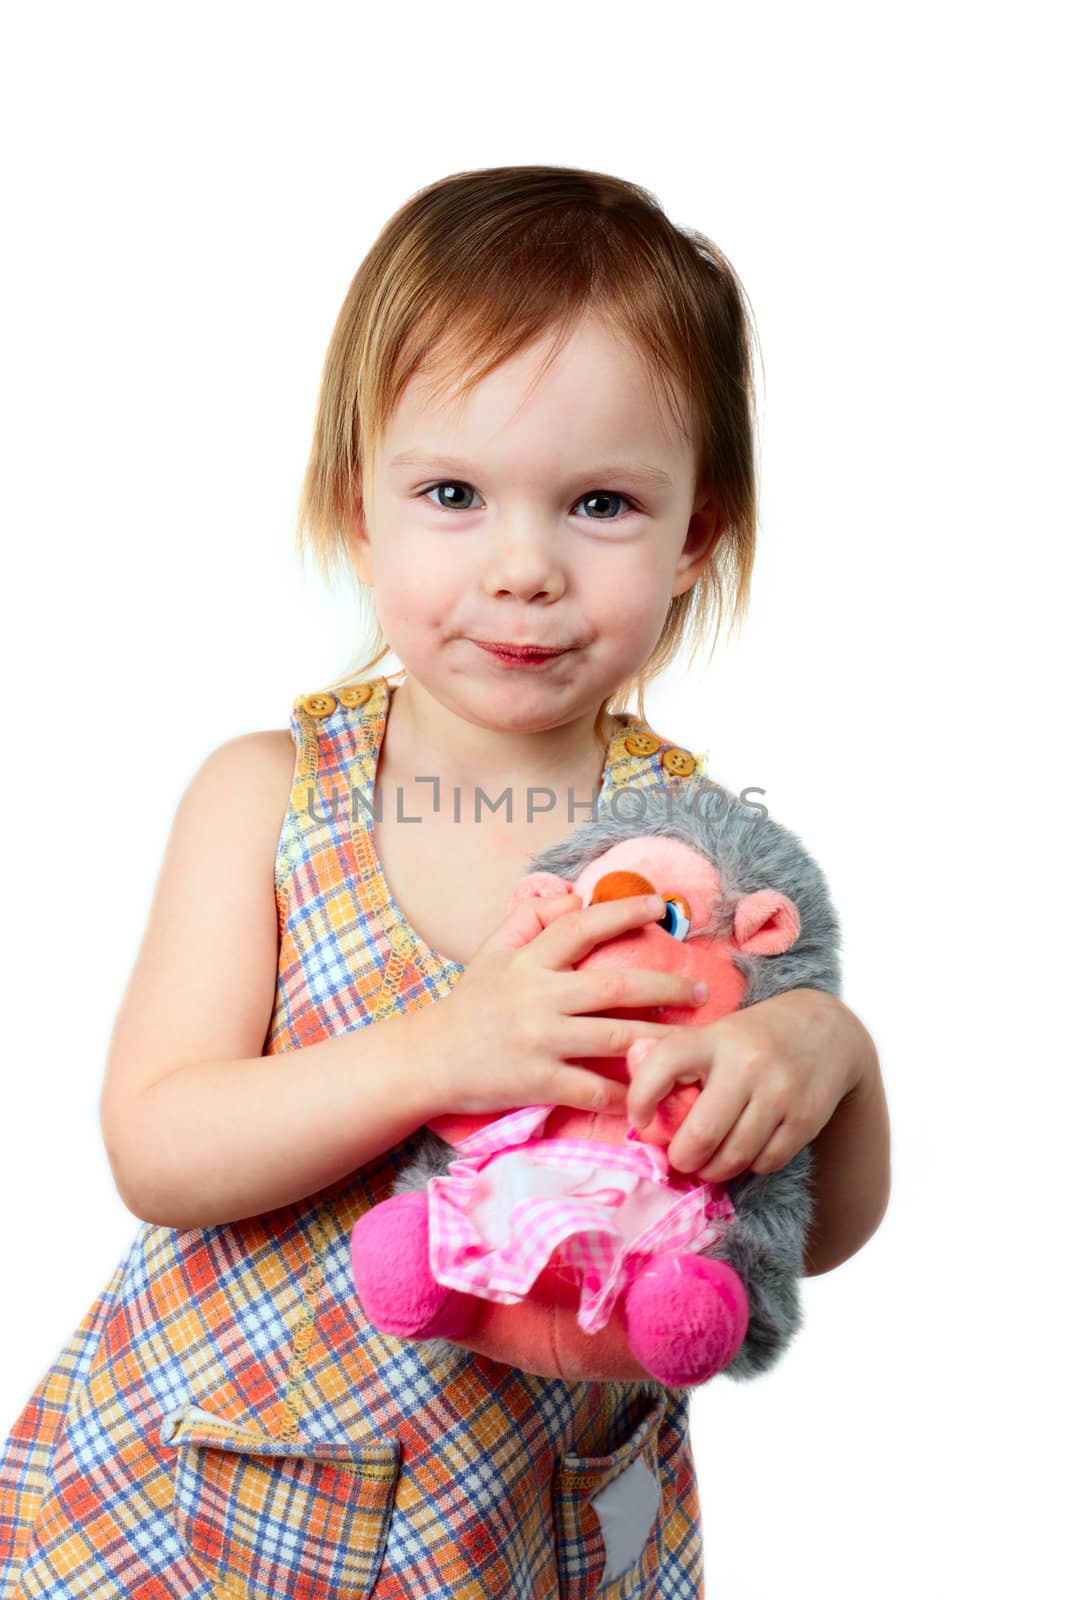 little beauty girl keep silence purse her's lips with toy hedgehog to hand which keep silence too